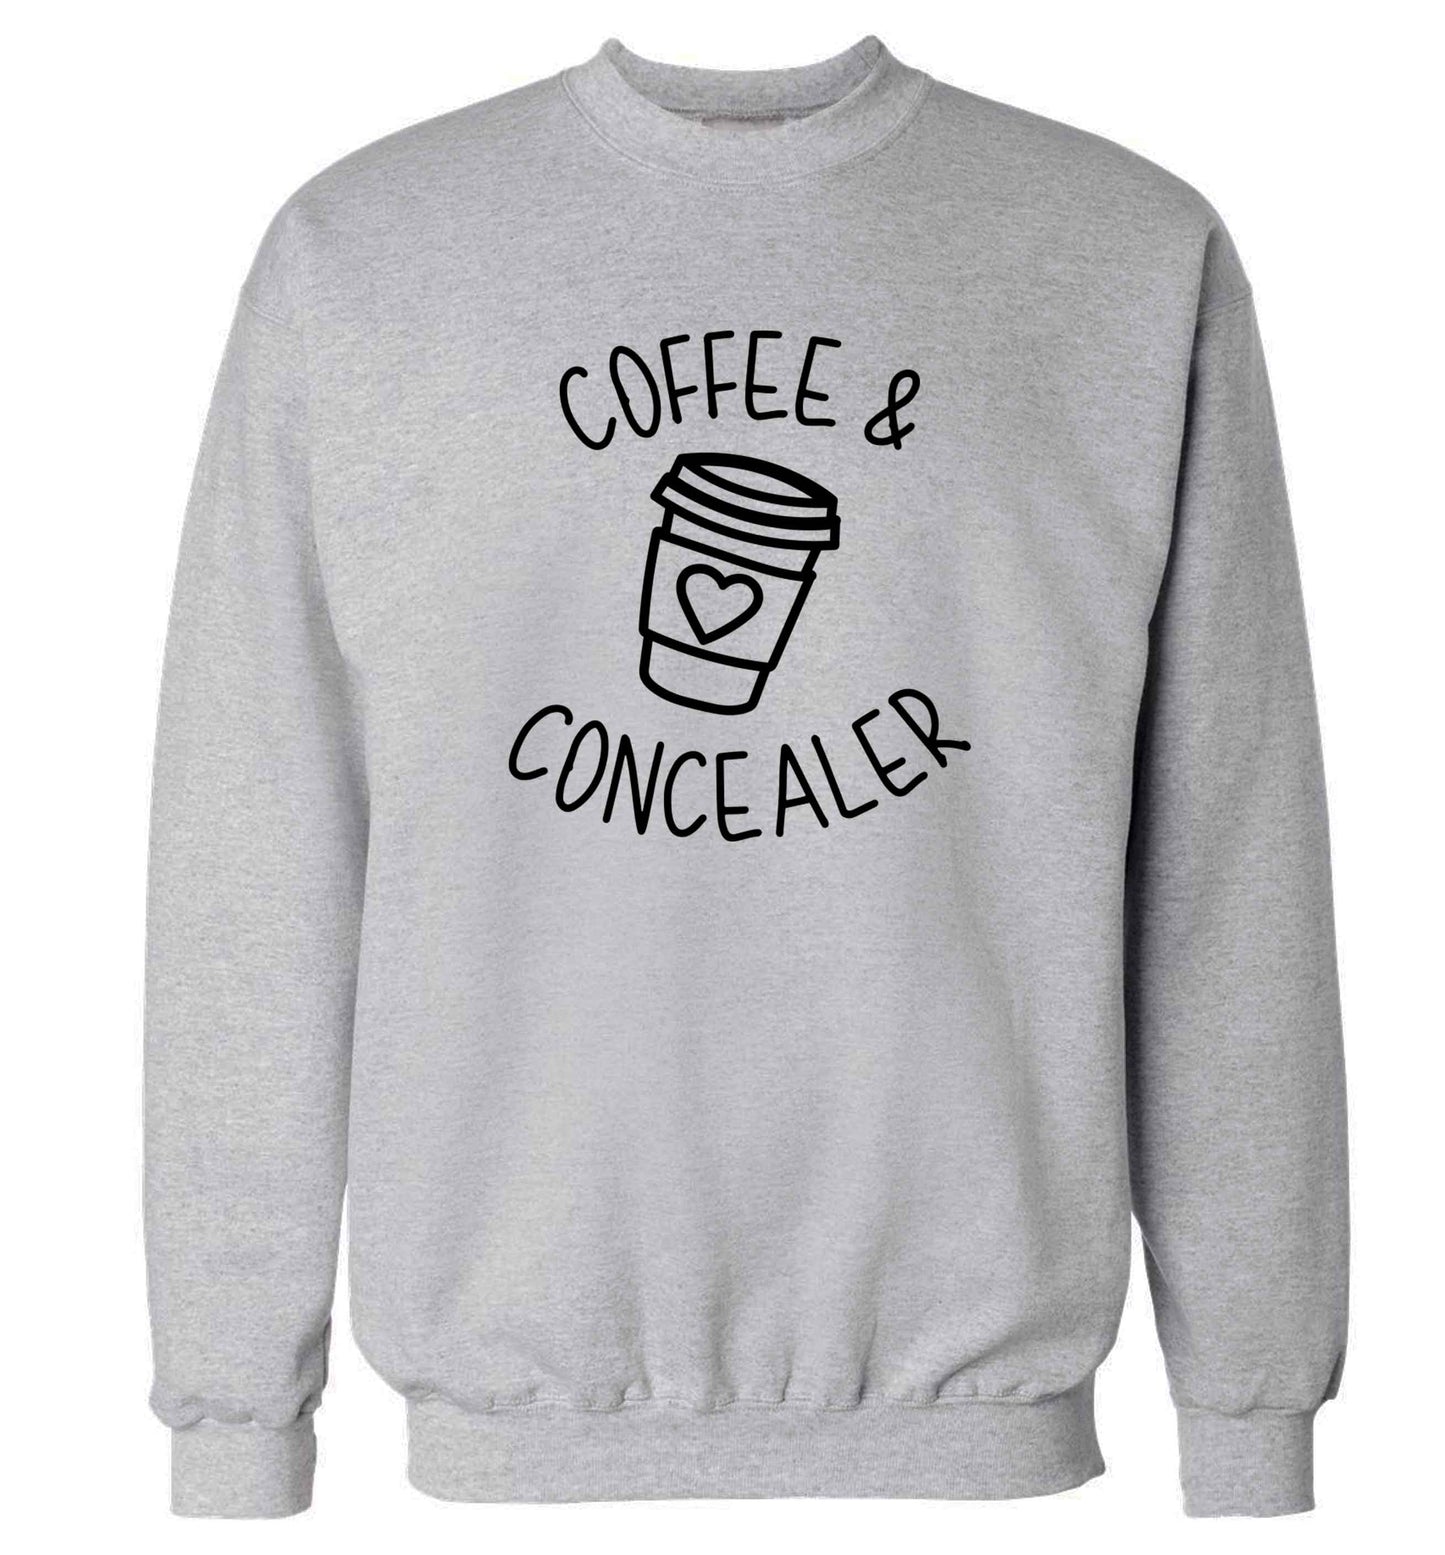 Coffee and concealer adult's unisex grey sweater 2XL